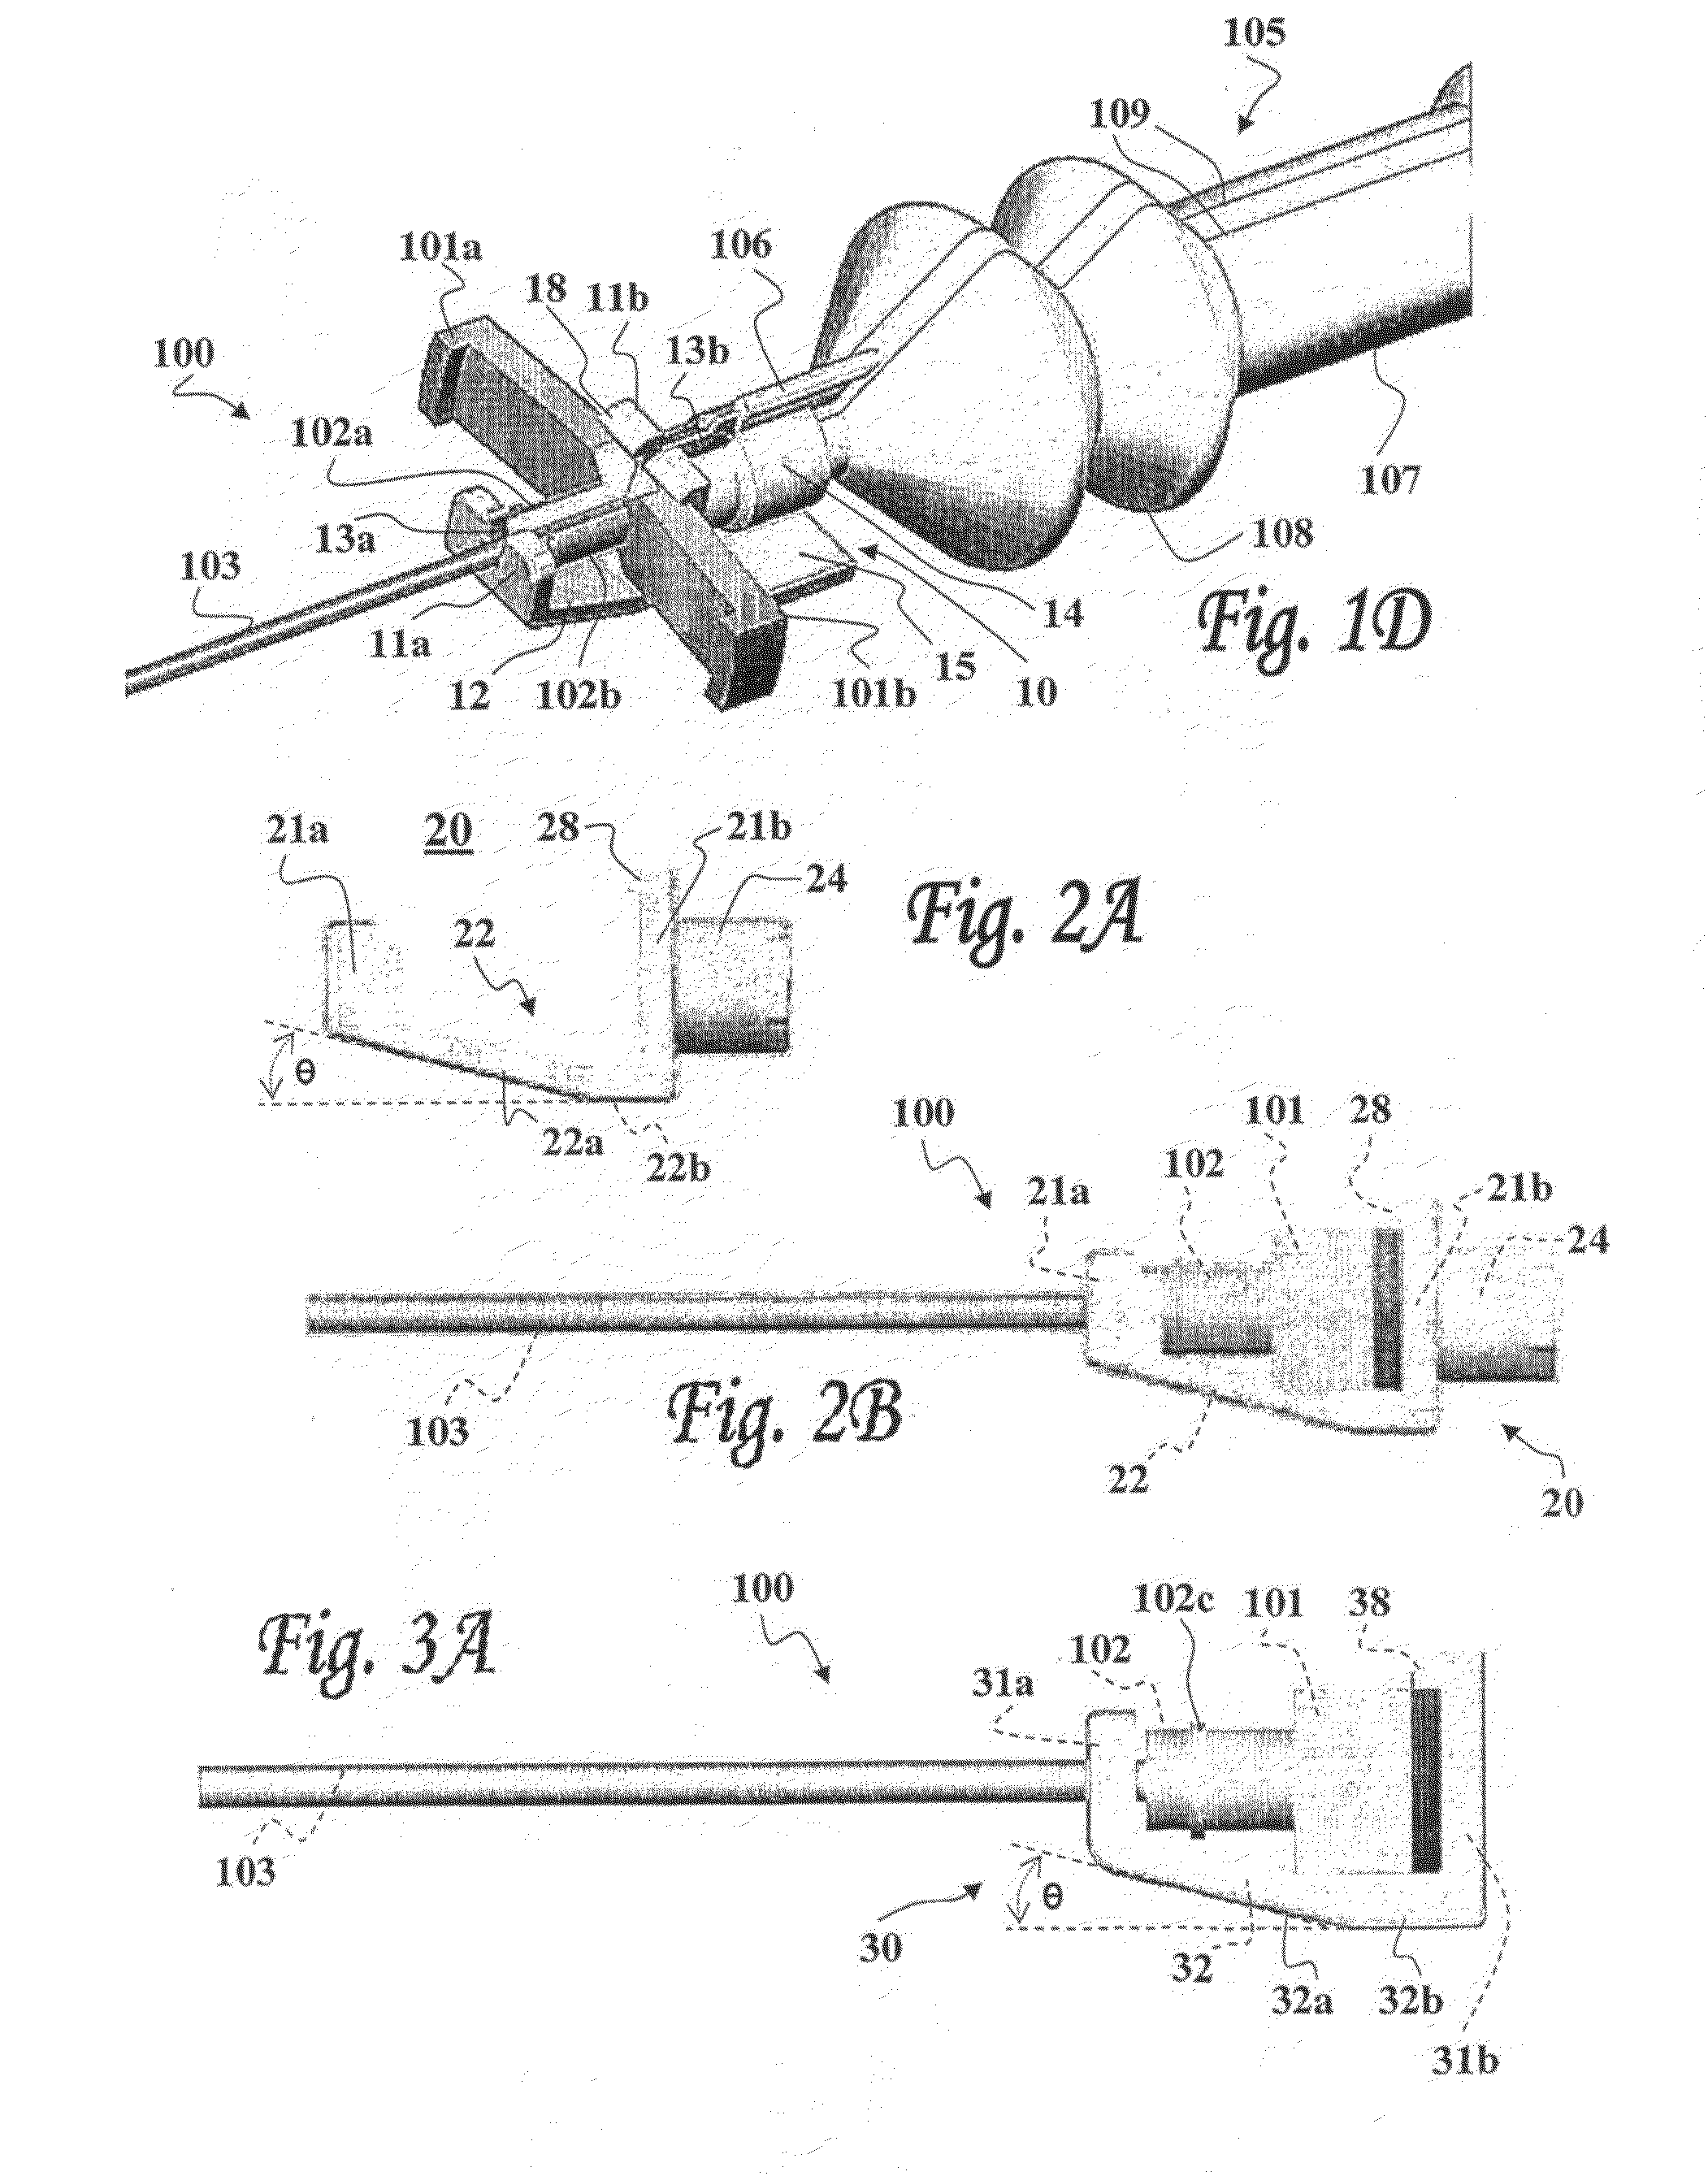 Removable Adapter for a Splittable Introducer and Method of Use Thereof